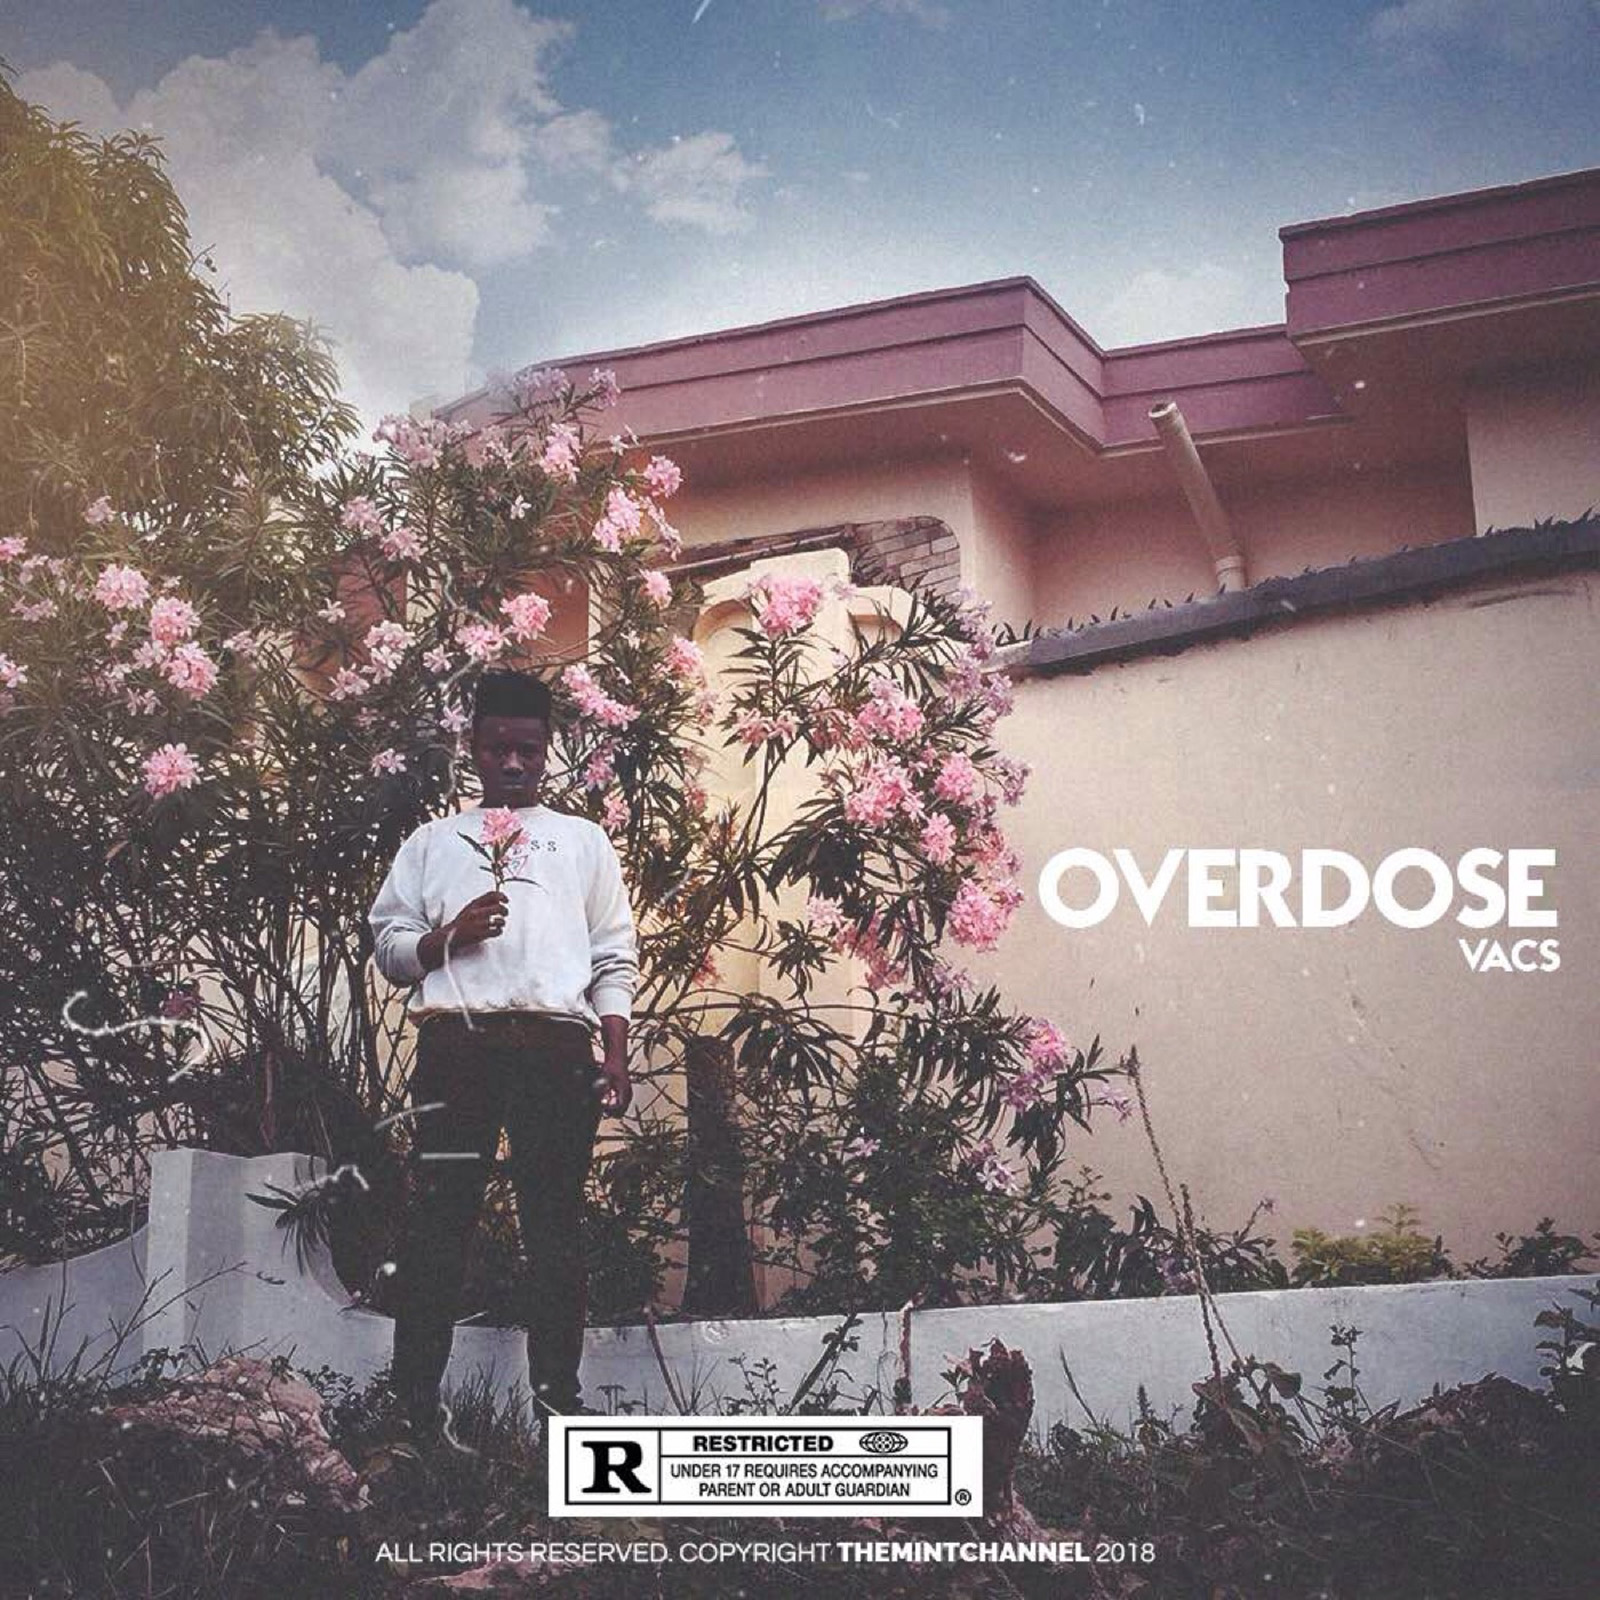 Overdose by Vacs